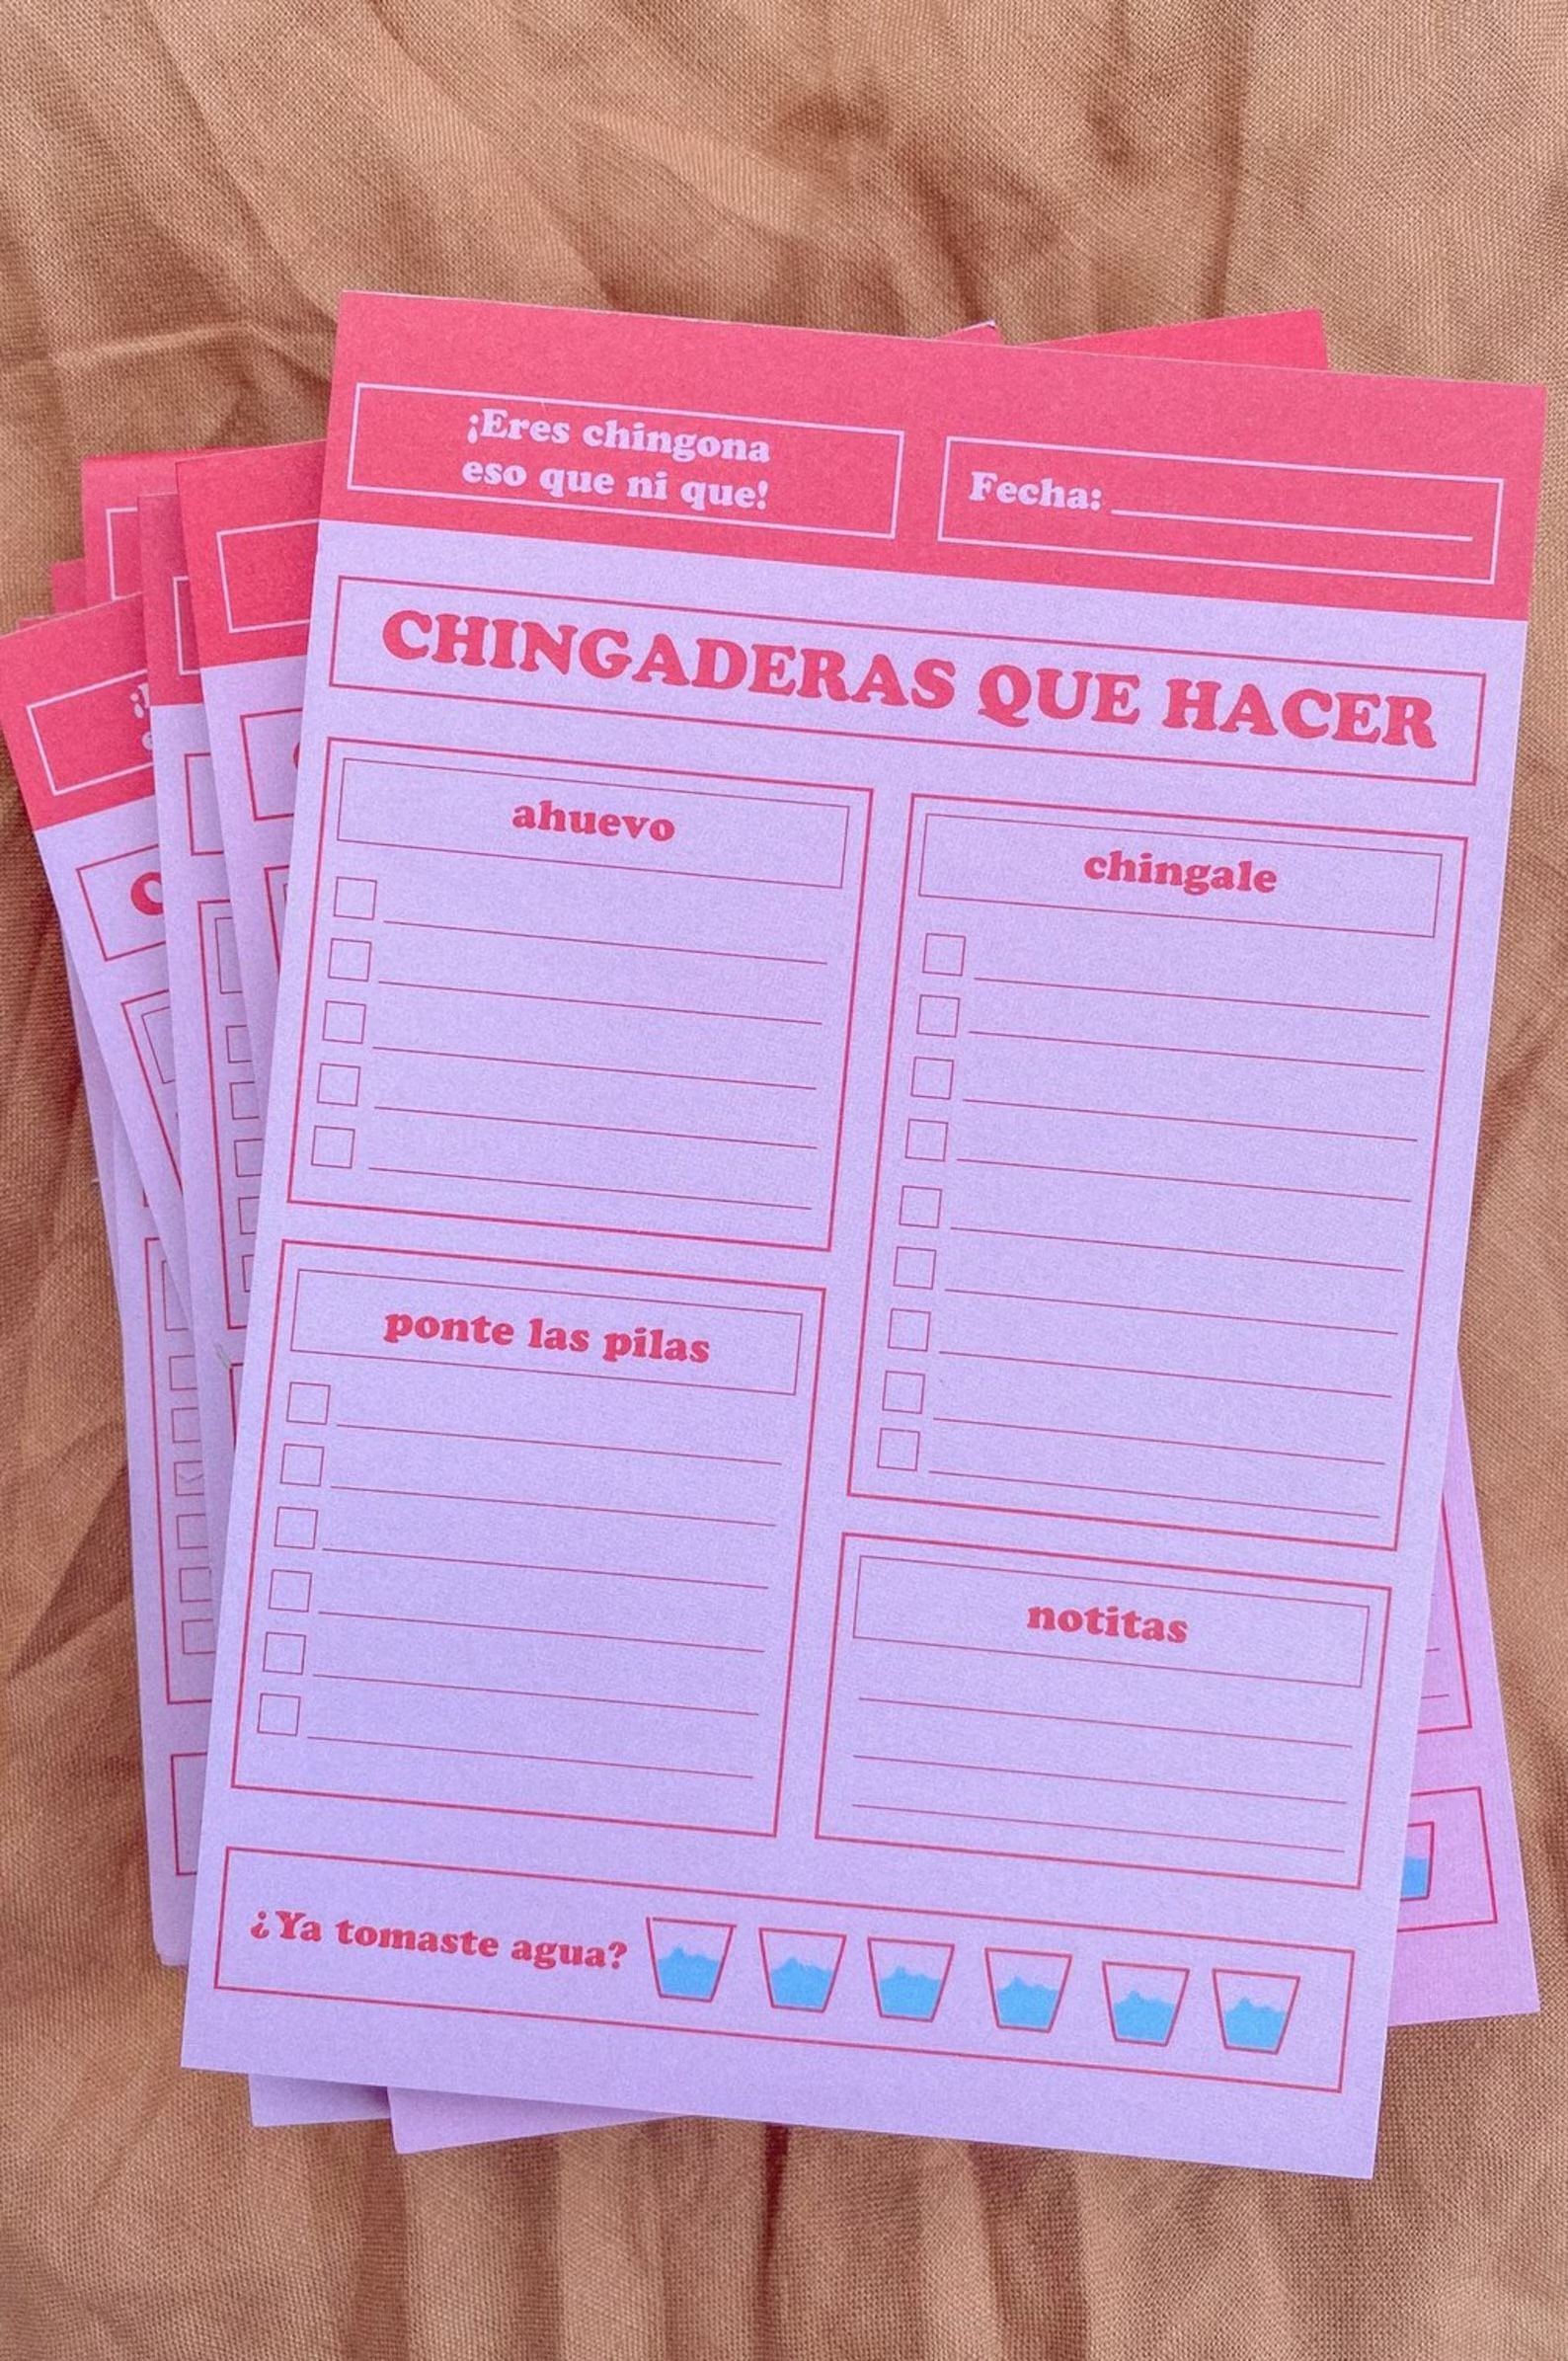 a pink notepad with the words "chingaderas que hacer" near the top with four divided checklists 